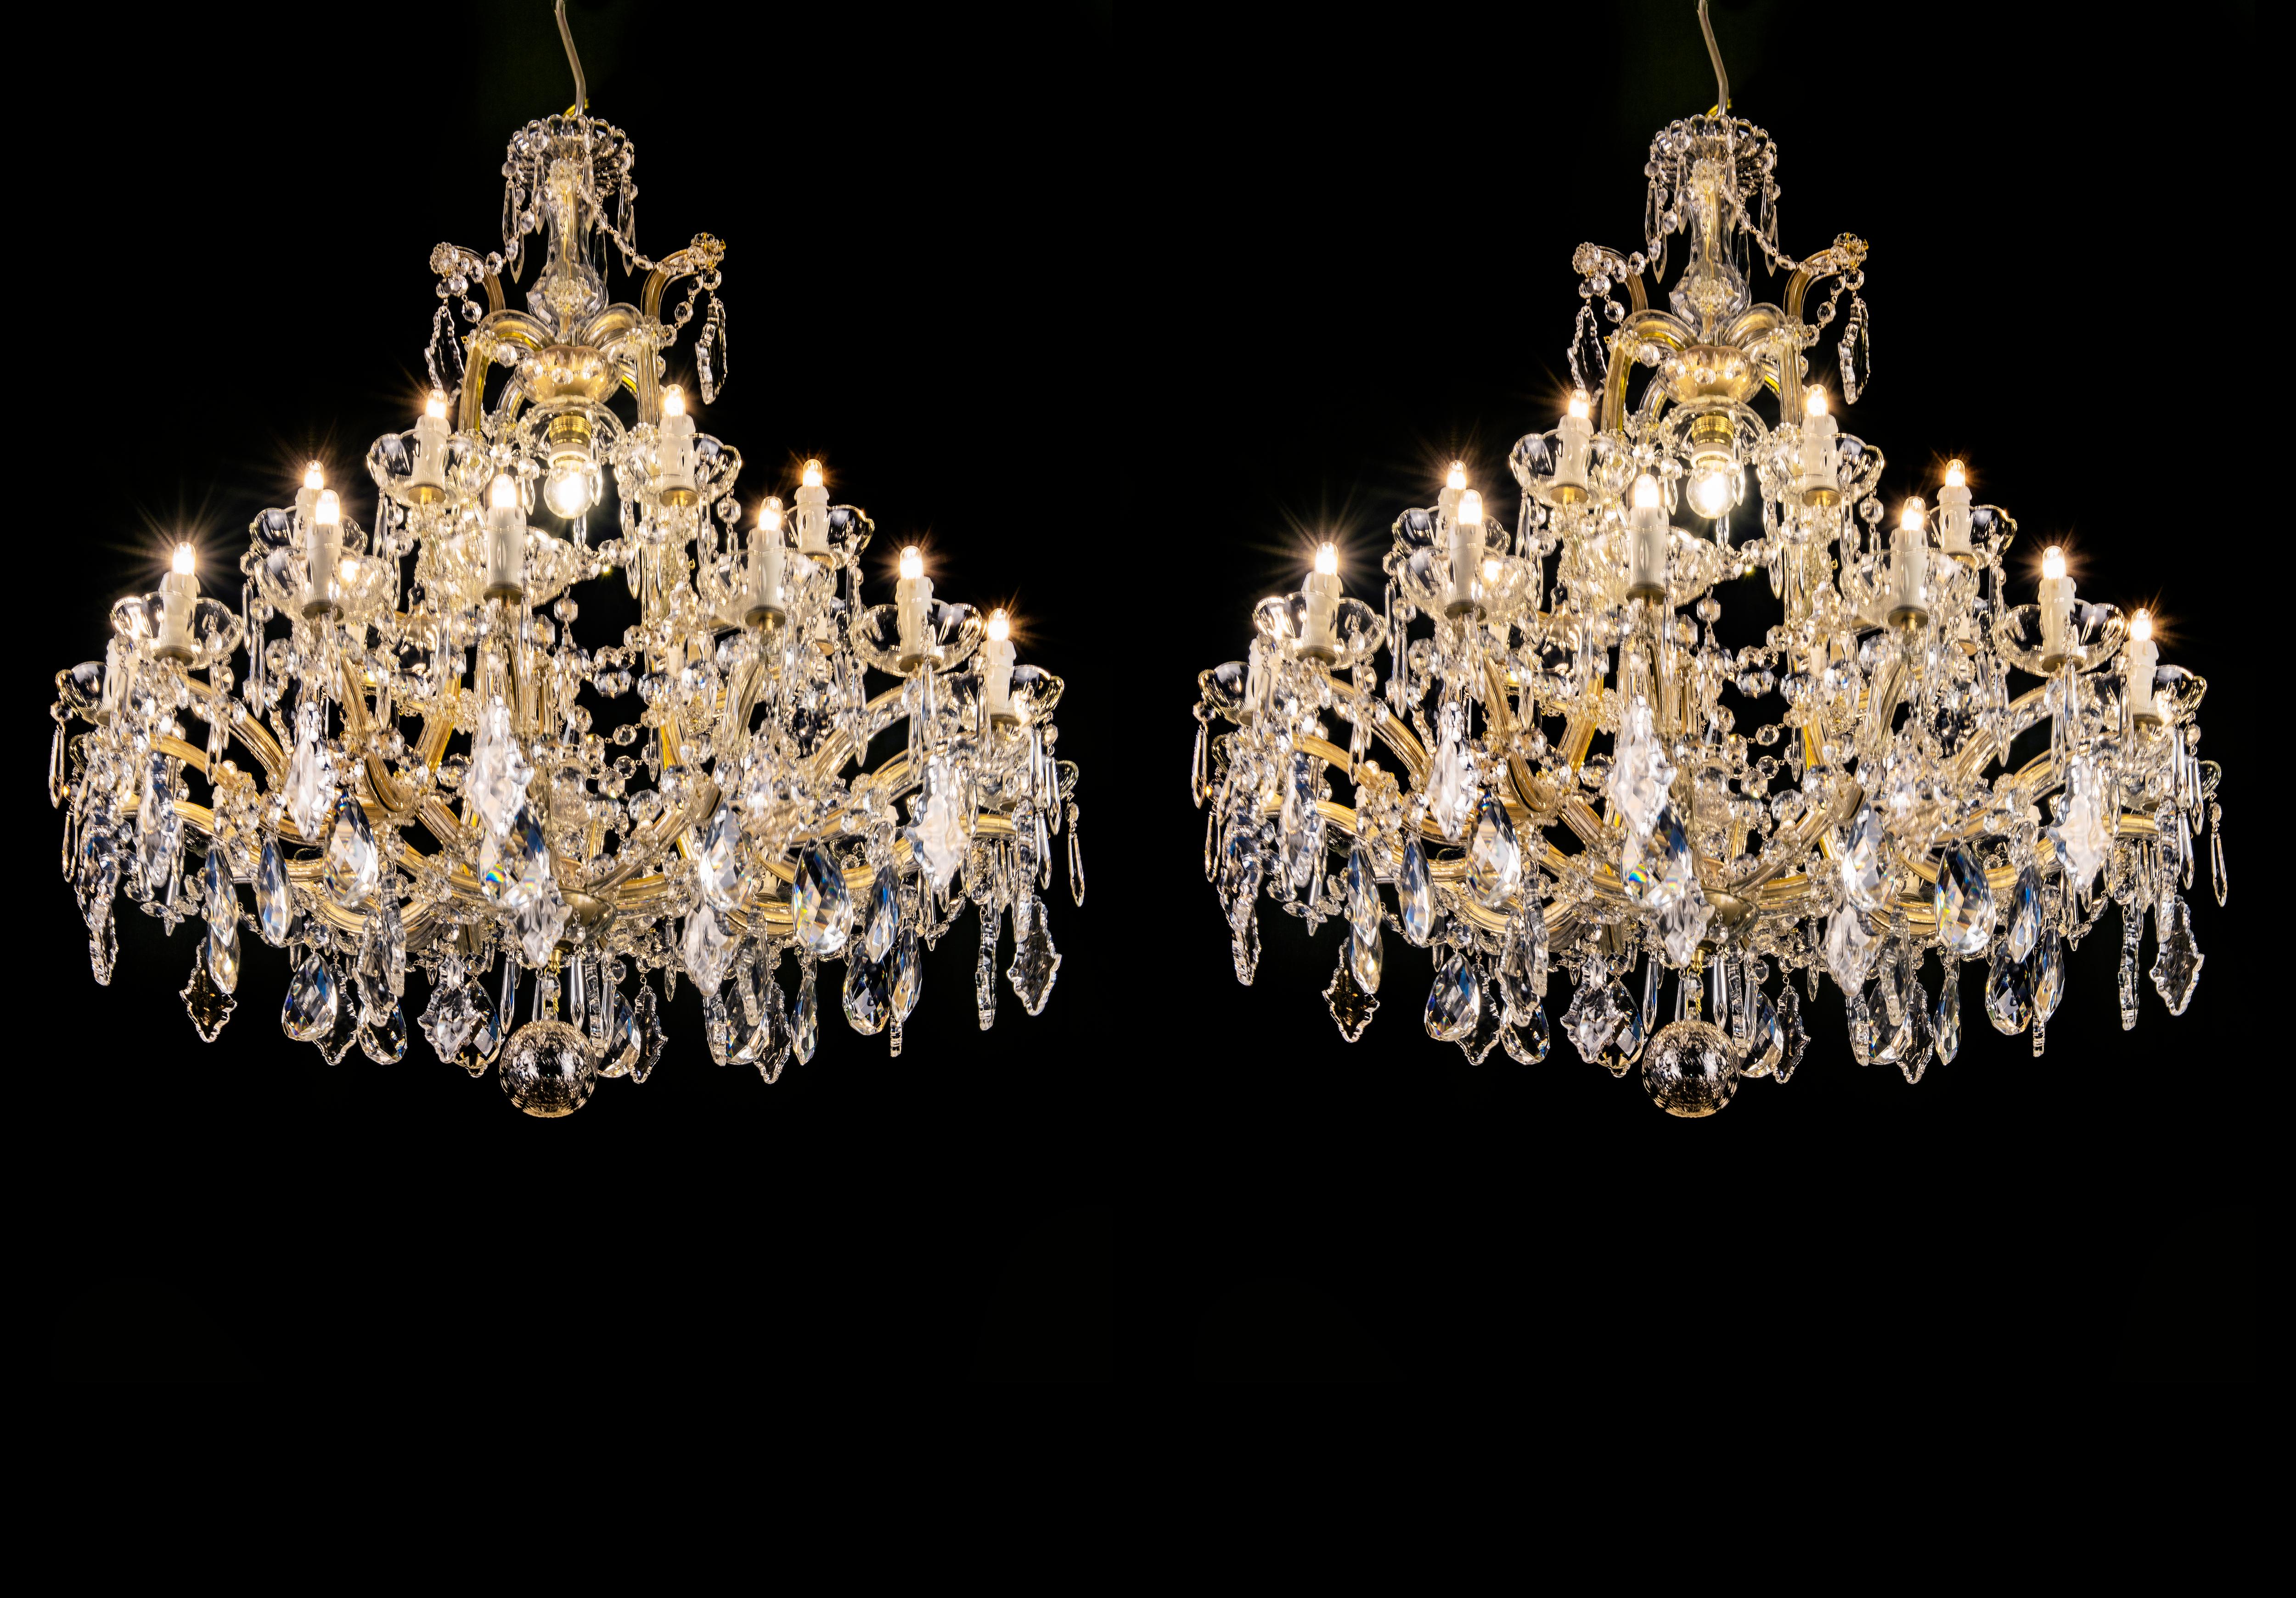 Gorgeous pair of Italian Marie Therese twentyfive light crystal chandeliers with a shaped central stem surmounted by beautifully contoured scrolling arms. These lovely two-tier chandeliers (or hanging fixtures) of crystal, cut-crystal and gilt metal